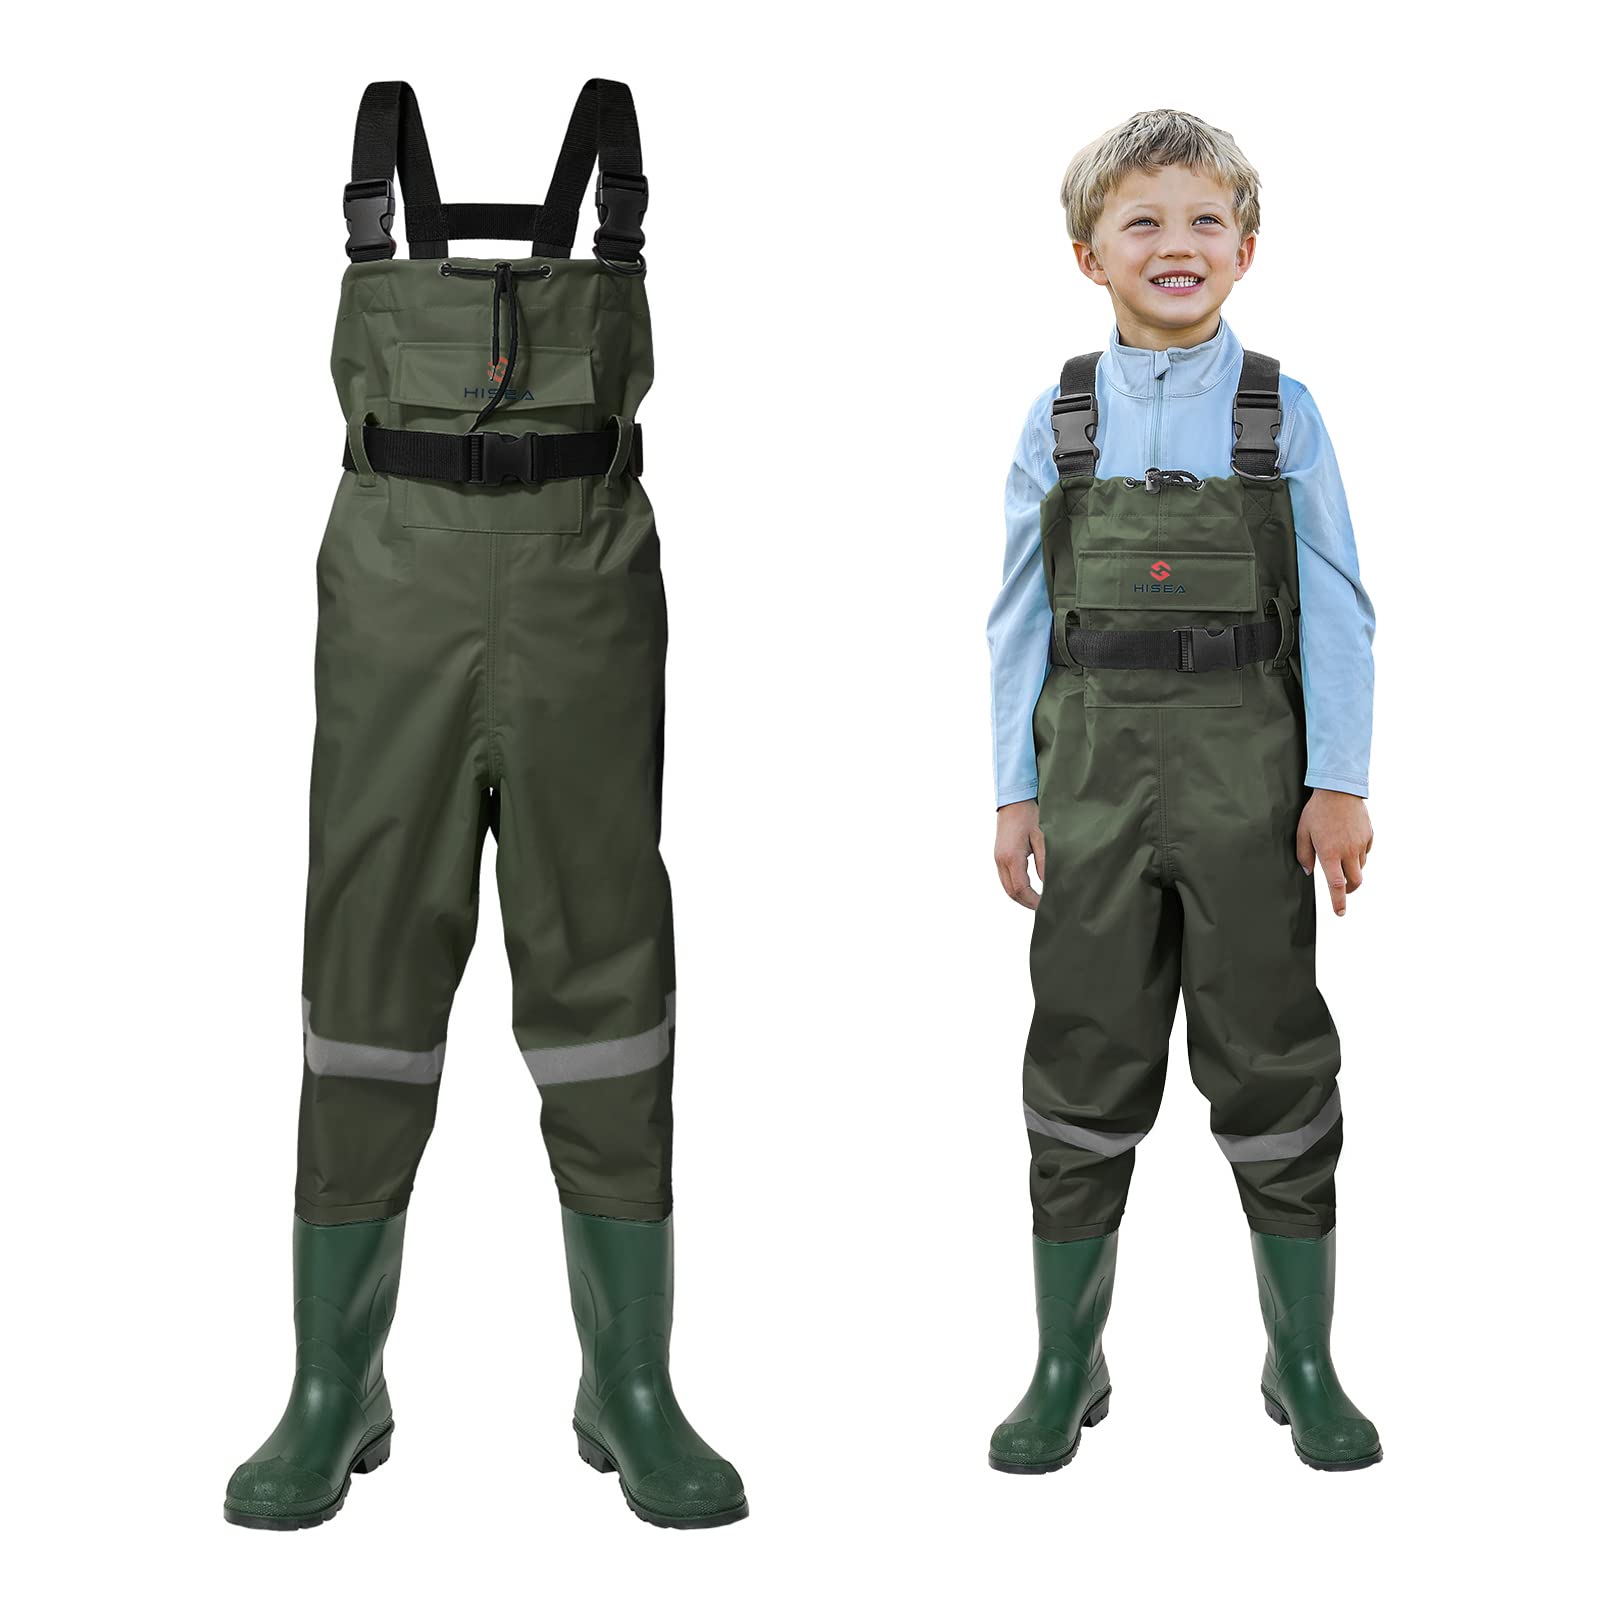 HISEA Kids Chest Waders Youth Fishing Waders for Toddler Children  Waterproof Hunting Waders with Boots & Reflect Safety Band Green 12/13 Big  Kid